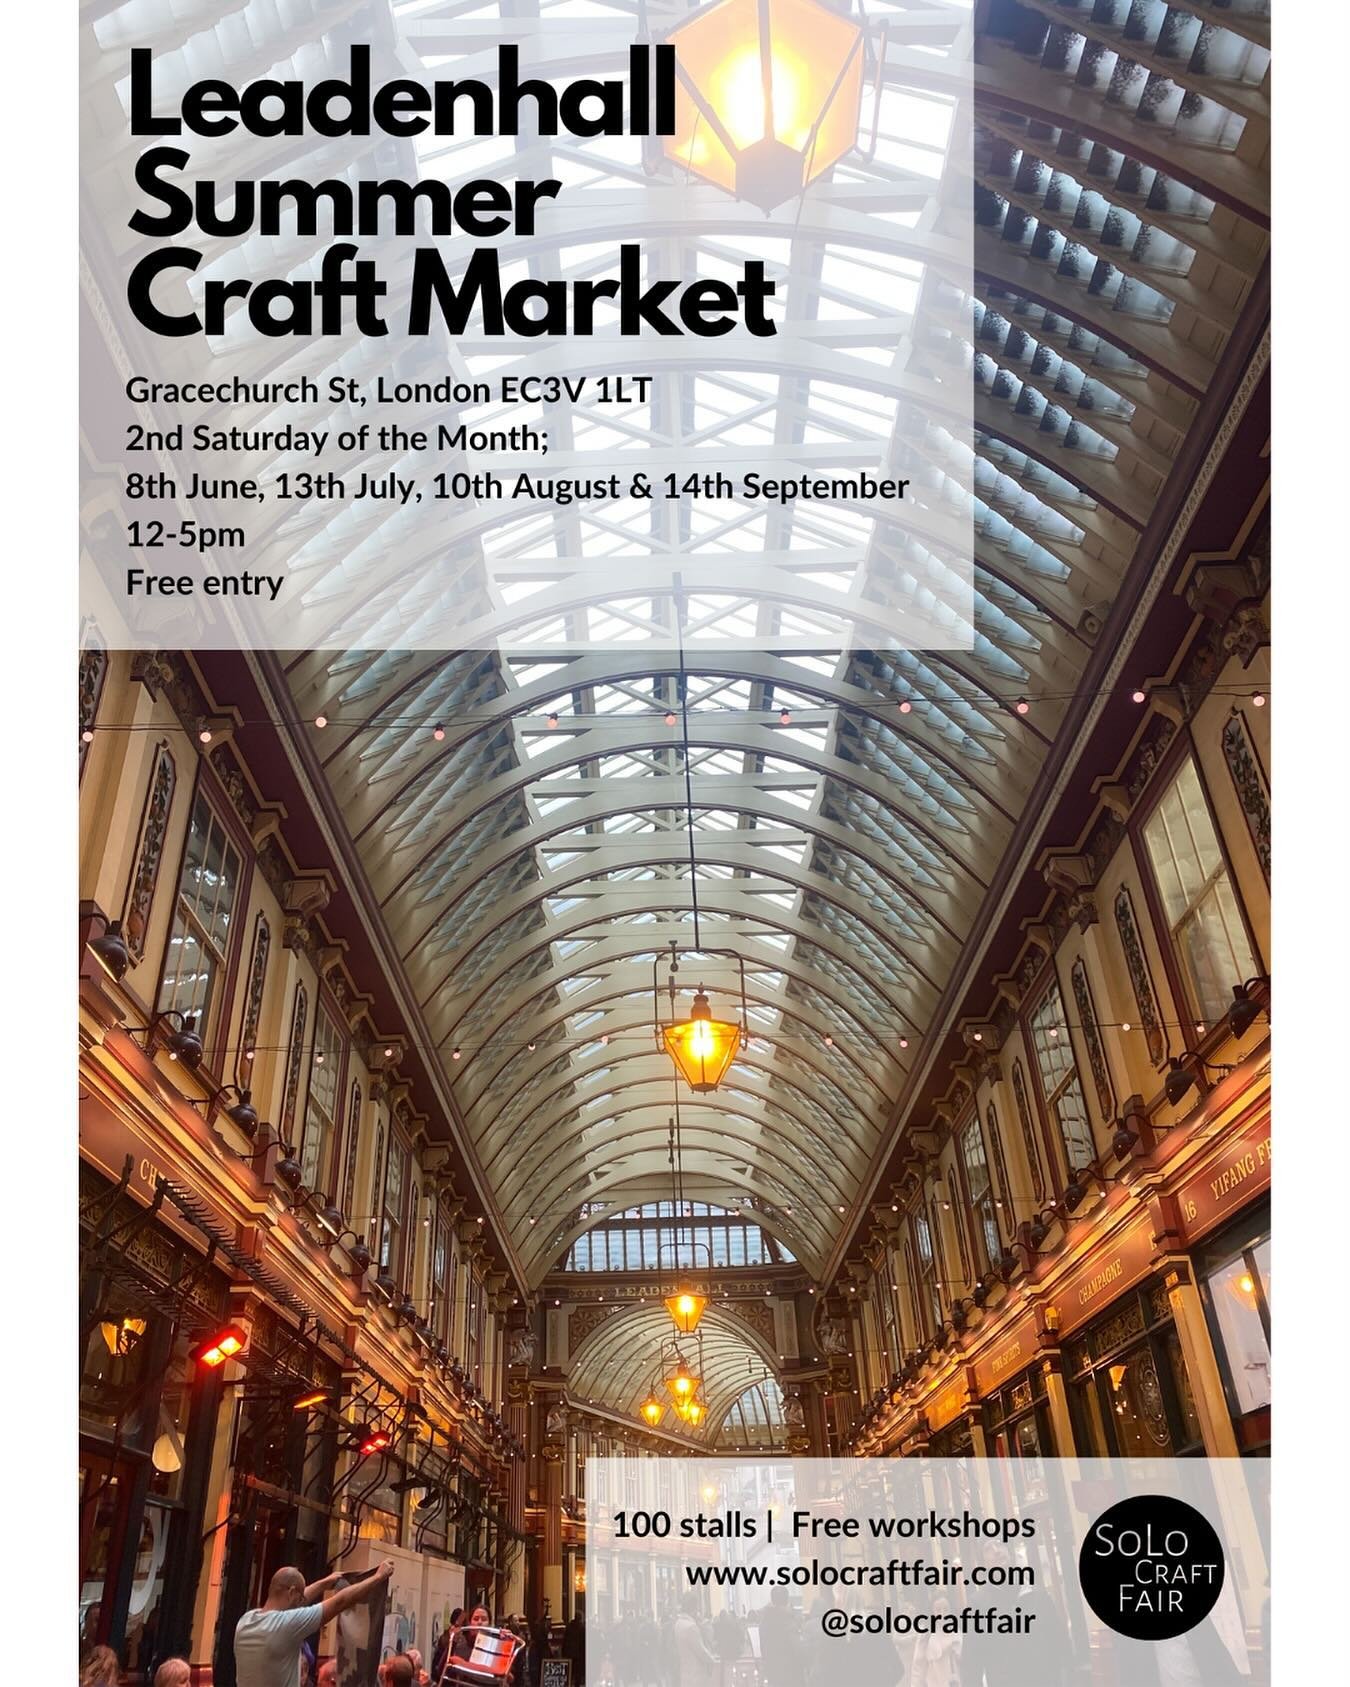 SoLo Craft Fair is thrilled to announce that they will be hosting a series of markets at the historic @leadenhallmarket this summer. This will be one of our biggest markets yet, as each event will feature over 100 different makers and designers selli